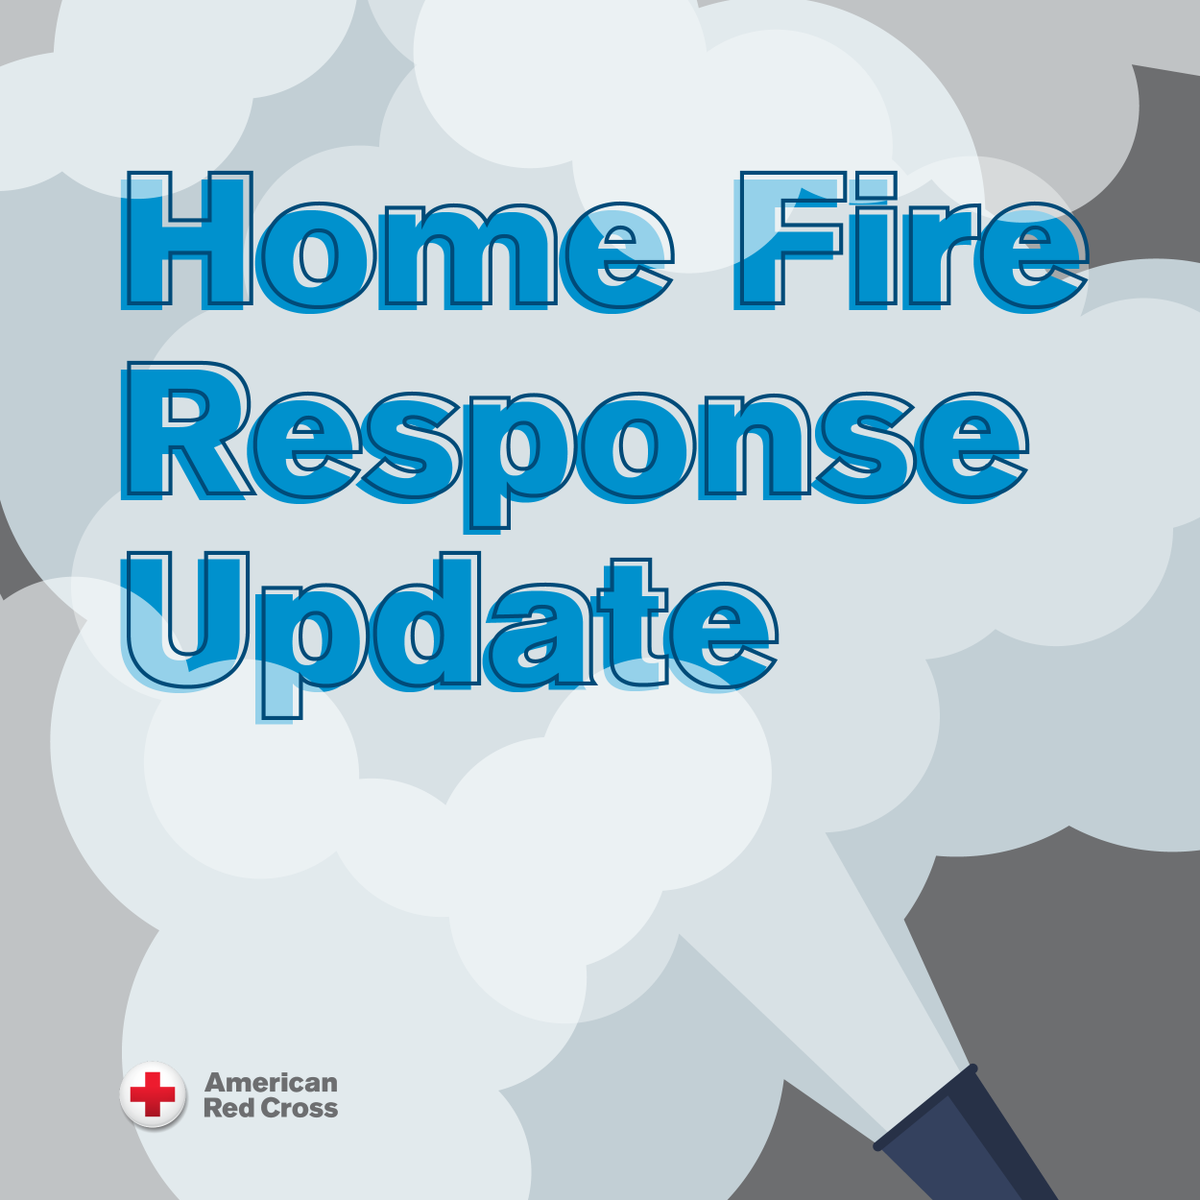 On Friday, our Disaster Action Team helped 4 families - 11 people - in response to Philadelphia home fires on the 2400 block N. 17th St., 5100 block Ludlow St. and 5500 block Blakemore St. #EndHomeFires